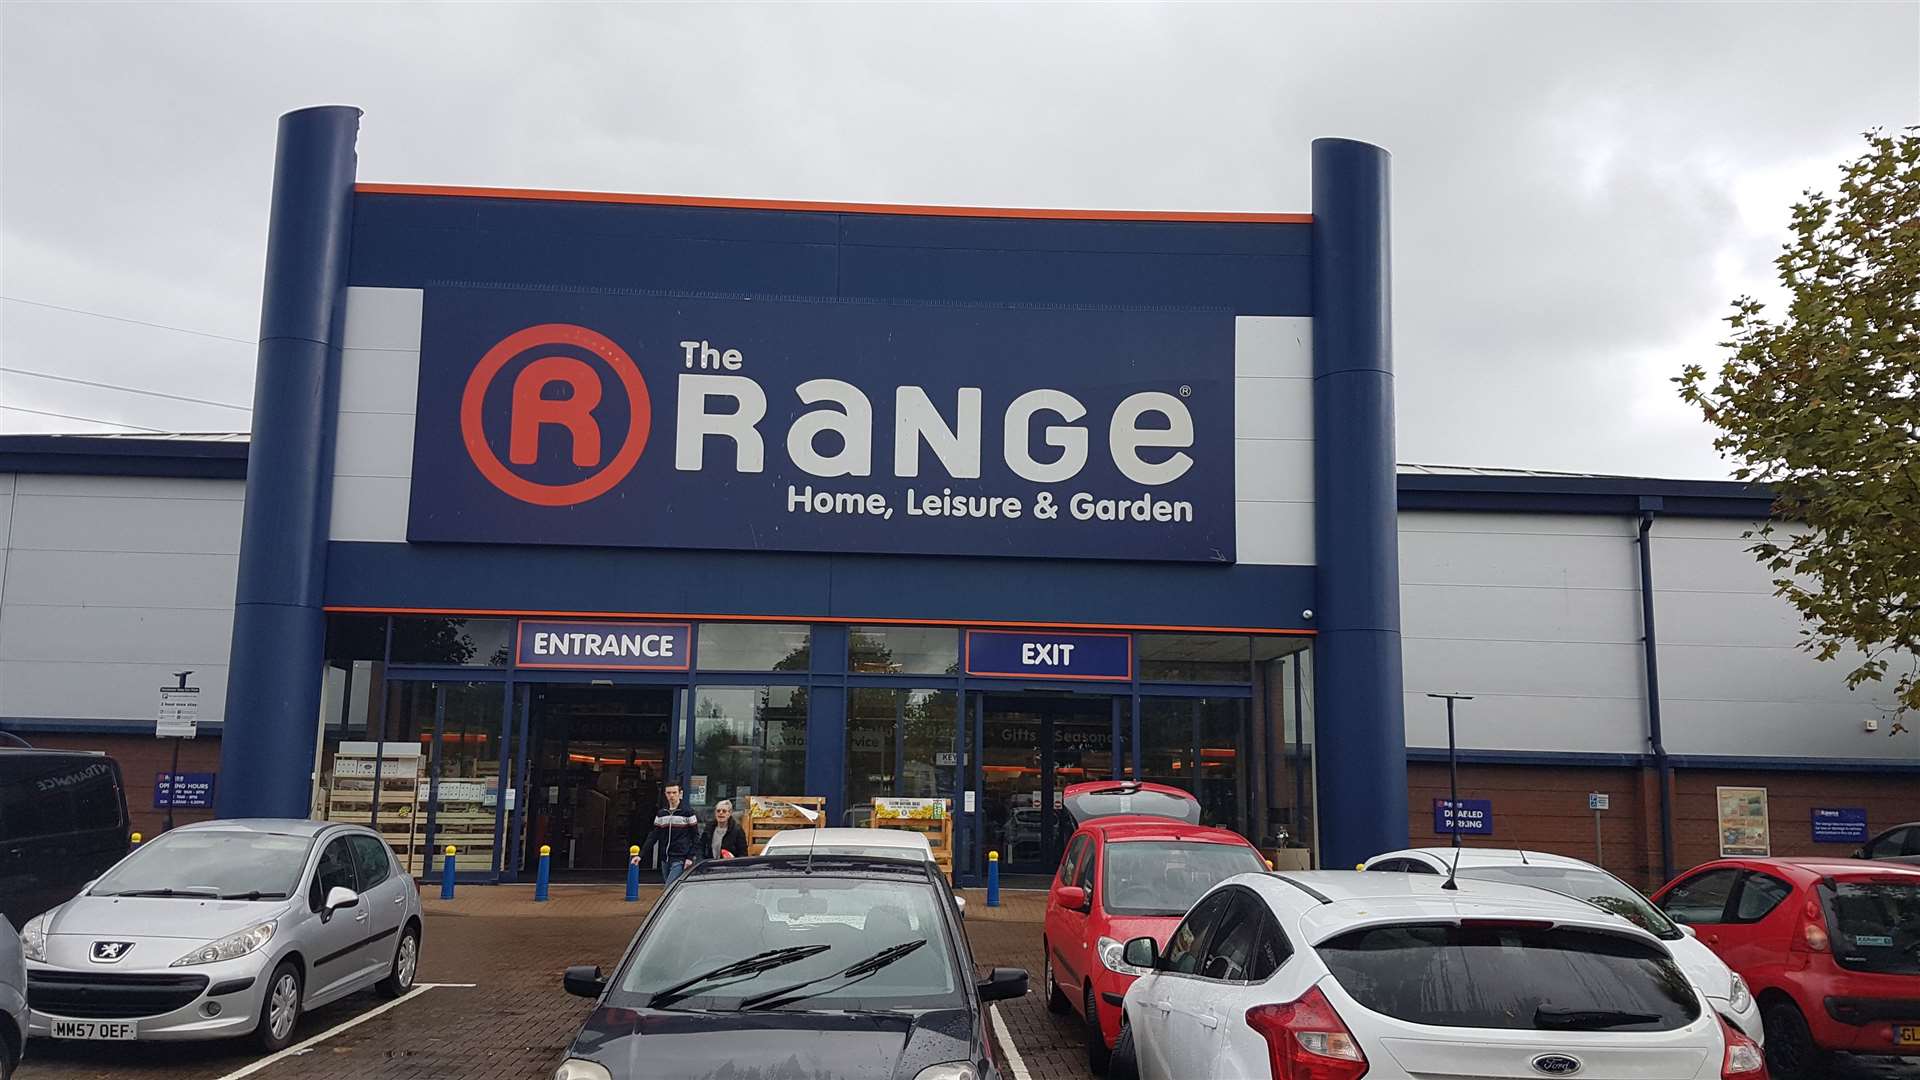 The Range has also applied to sell its Iceland range at its Canterbury store